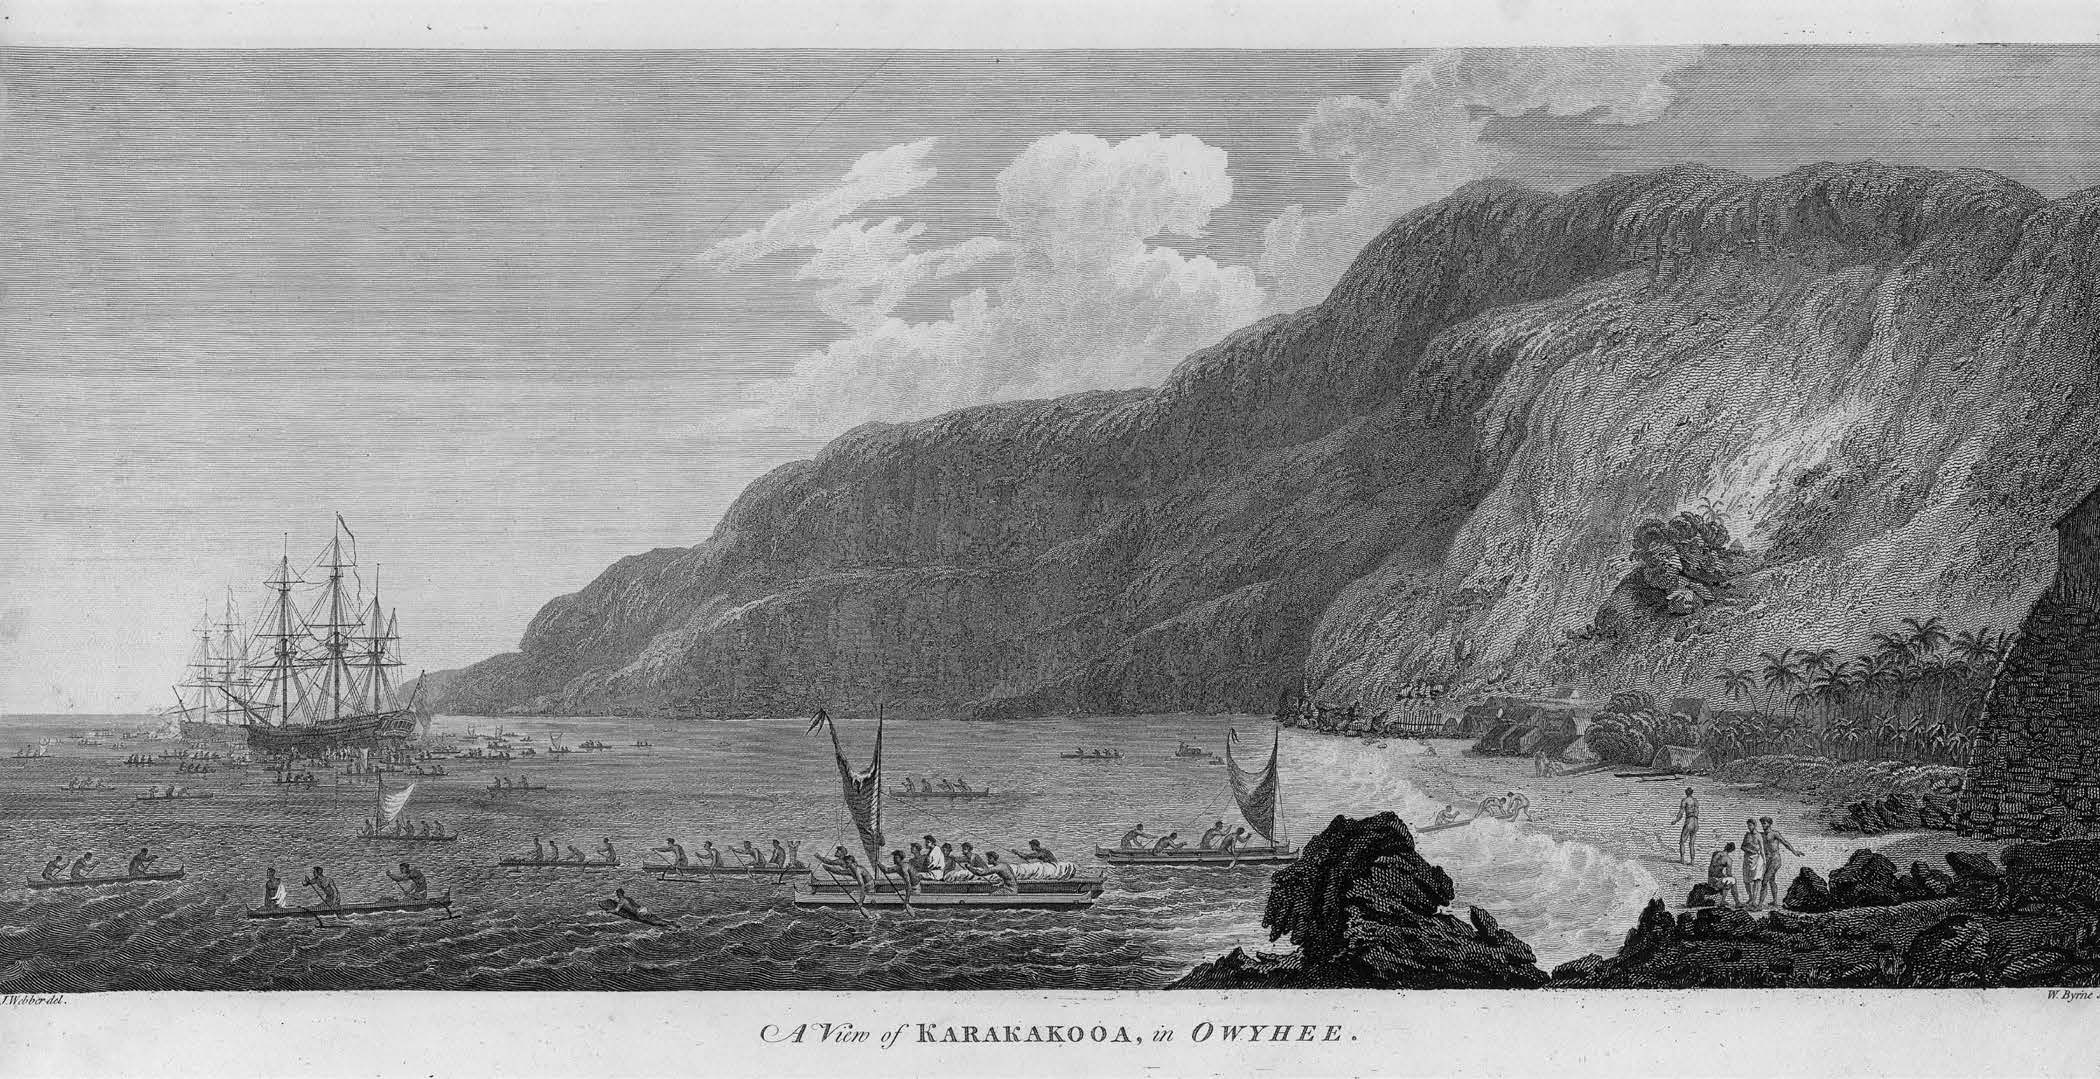 Captain James Cook’s encounter with Hawai‘i put the islands on the map and would bring vast change to the Hawaiian people. Drawing by John Webber, the Cook expedition’s artist. Courtesy of Wikimedia Commons.